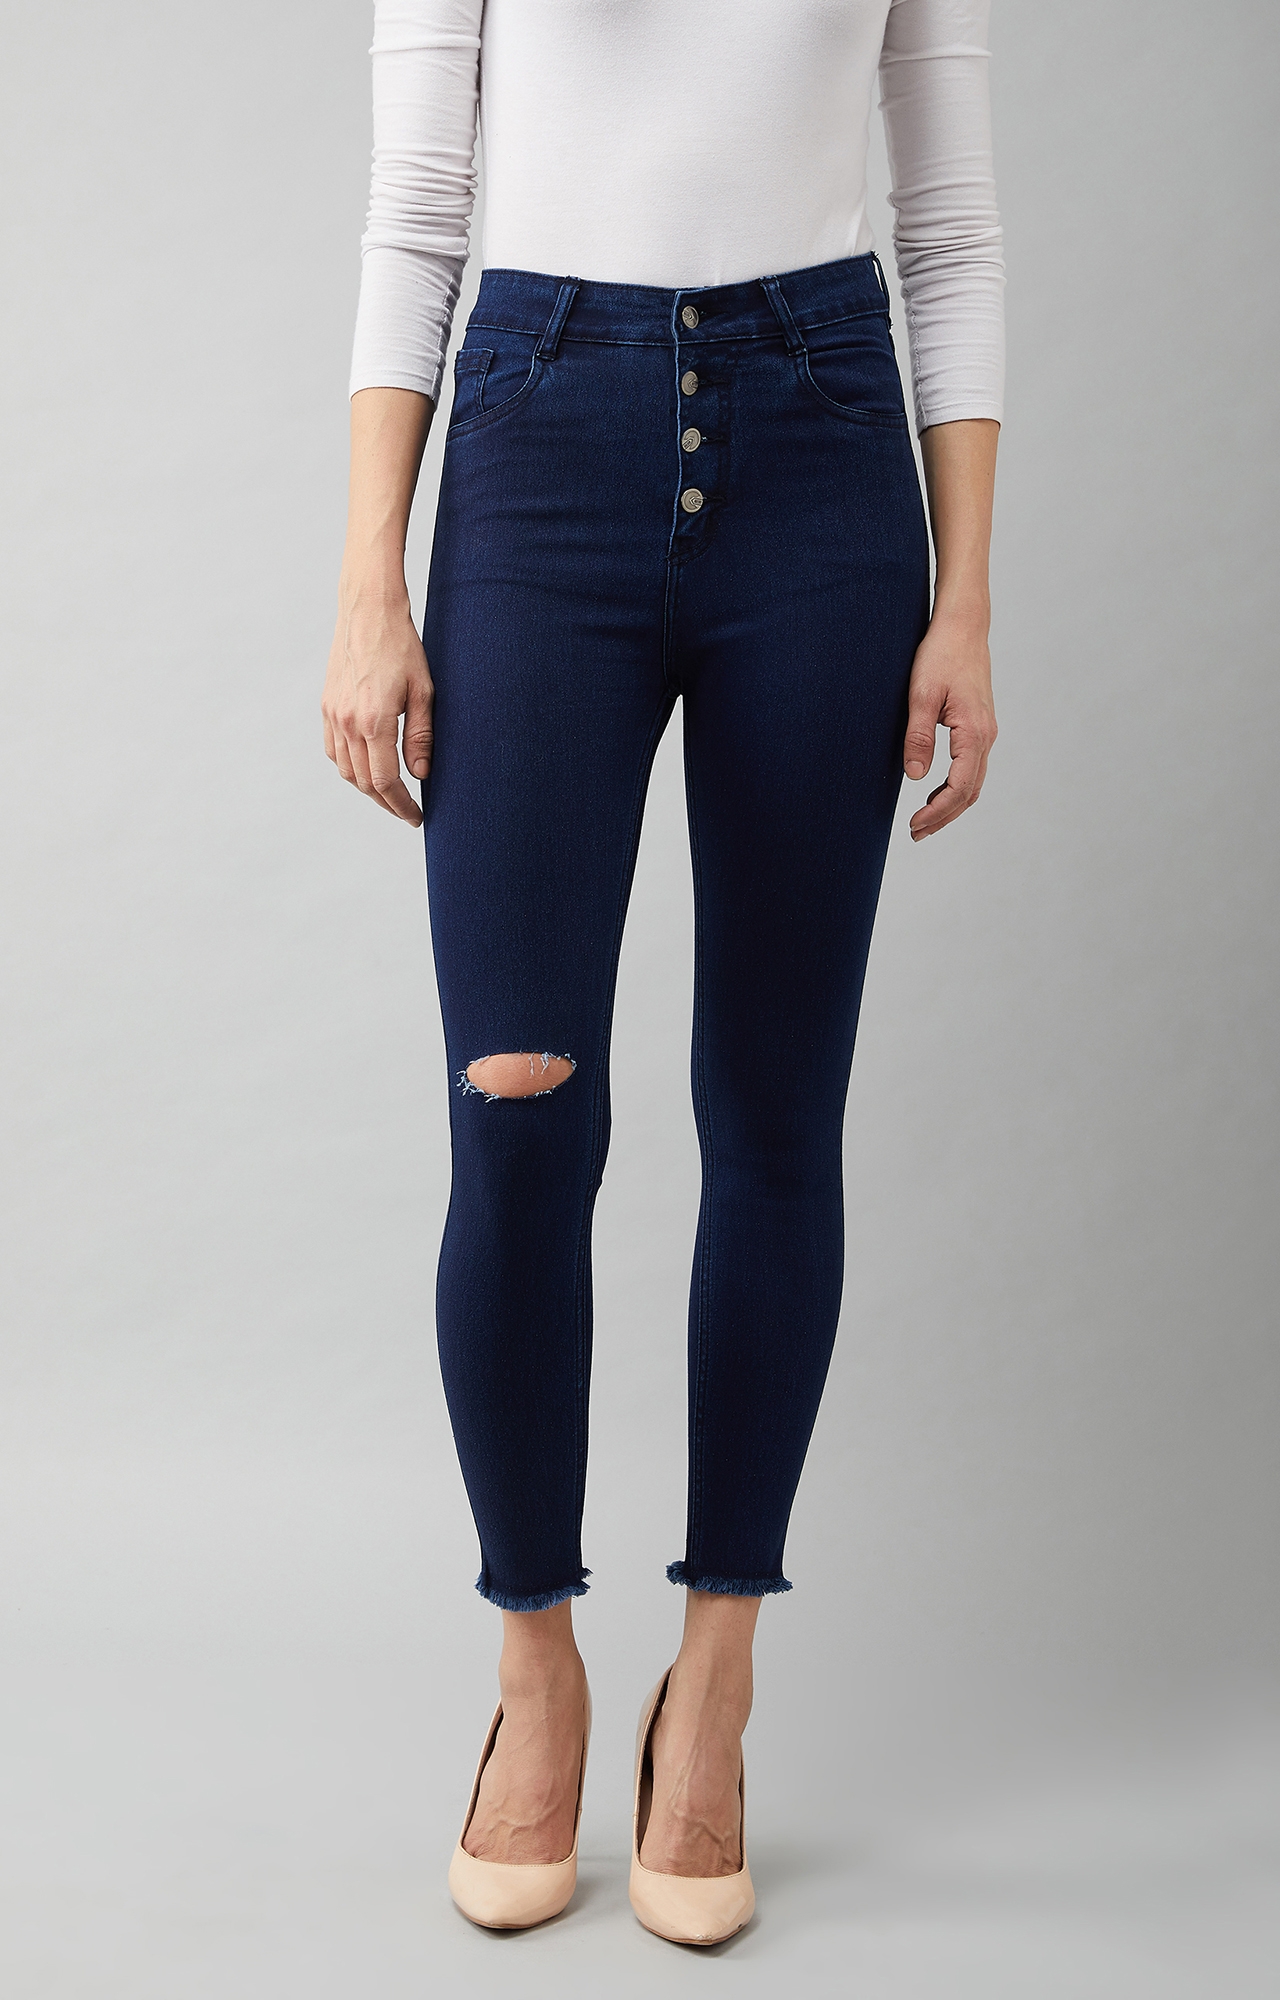 Dolce Crudo | Women's Navy Blue Cotton Skinny Fit Cropped High Rise Stretchable Denim Jeans